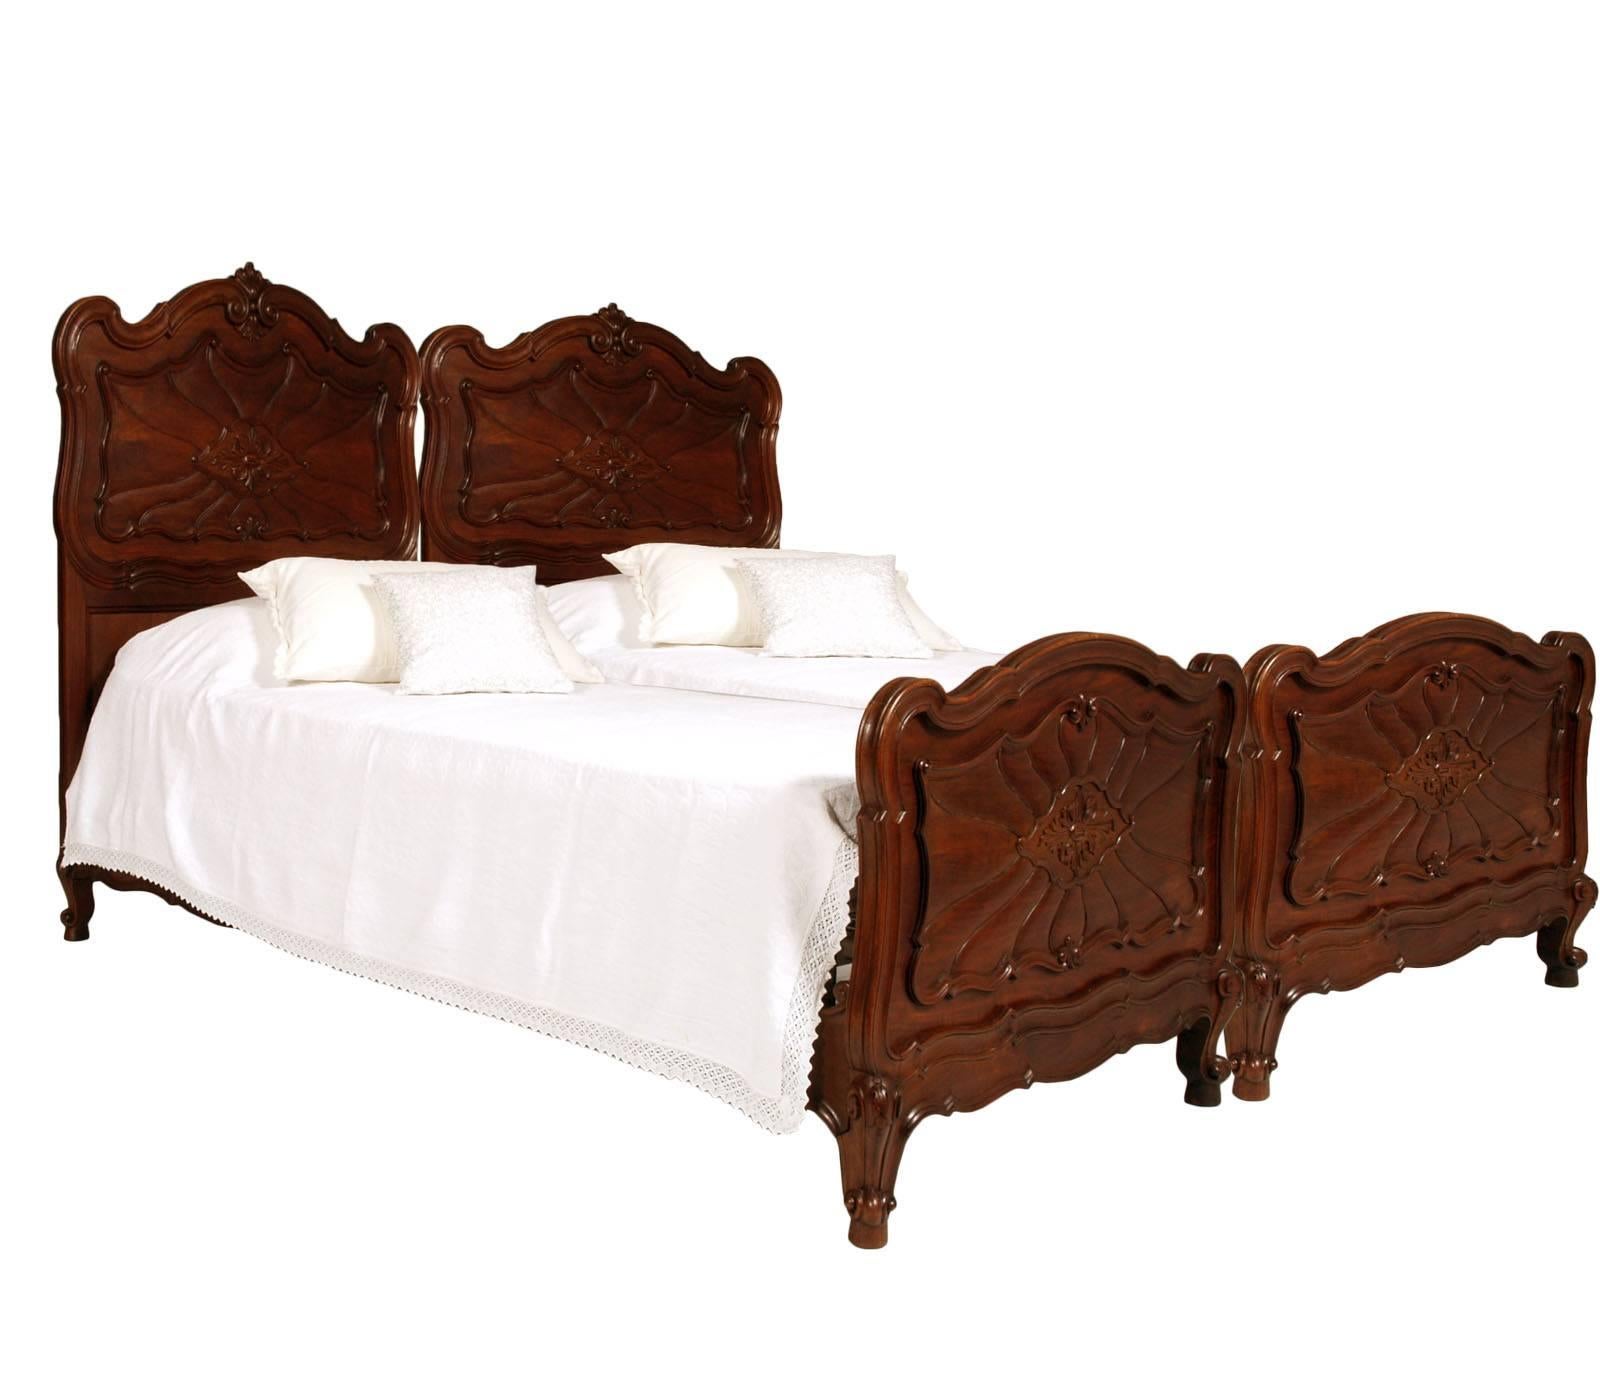 Complete bedroom late 19th century superb Italy Baroque massive with beautifully carved floral motifs walnut. (Eclectic style)
with wardrobe, pair of twin beds with nets, drawers with mirror and pair of nightstands.

Measure in cm:
Beds H